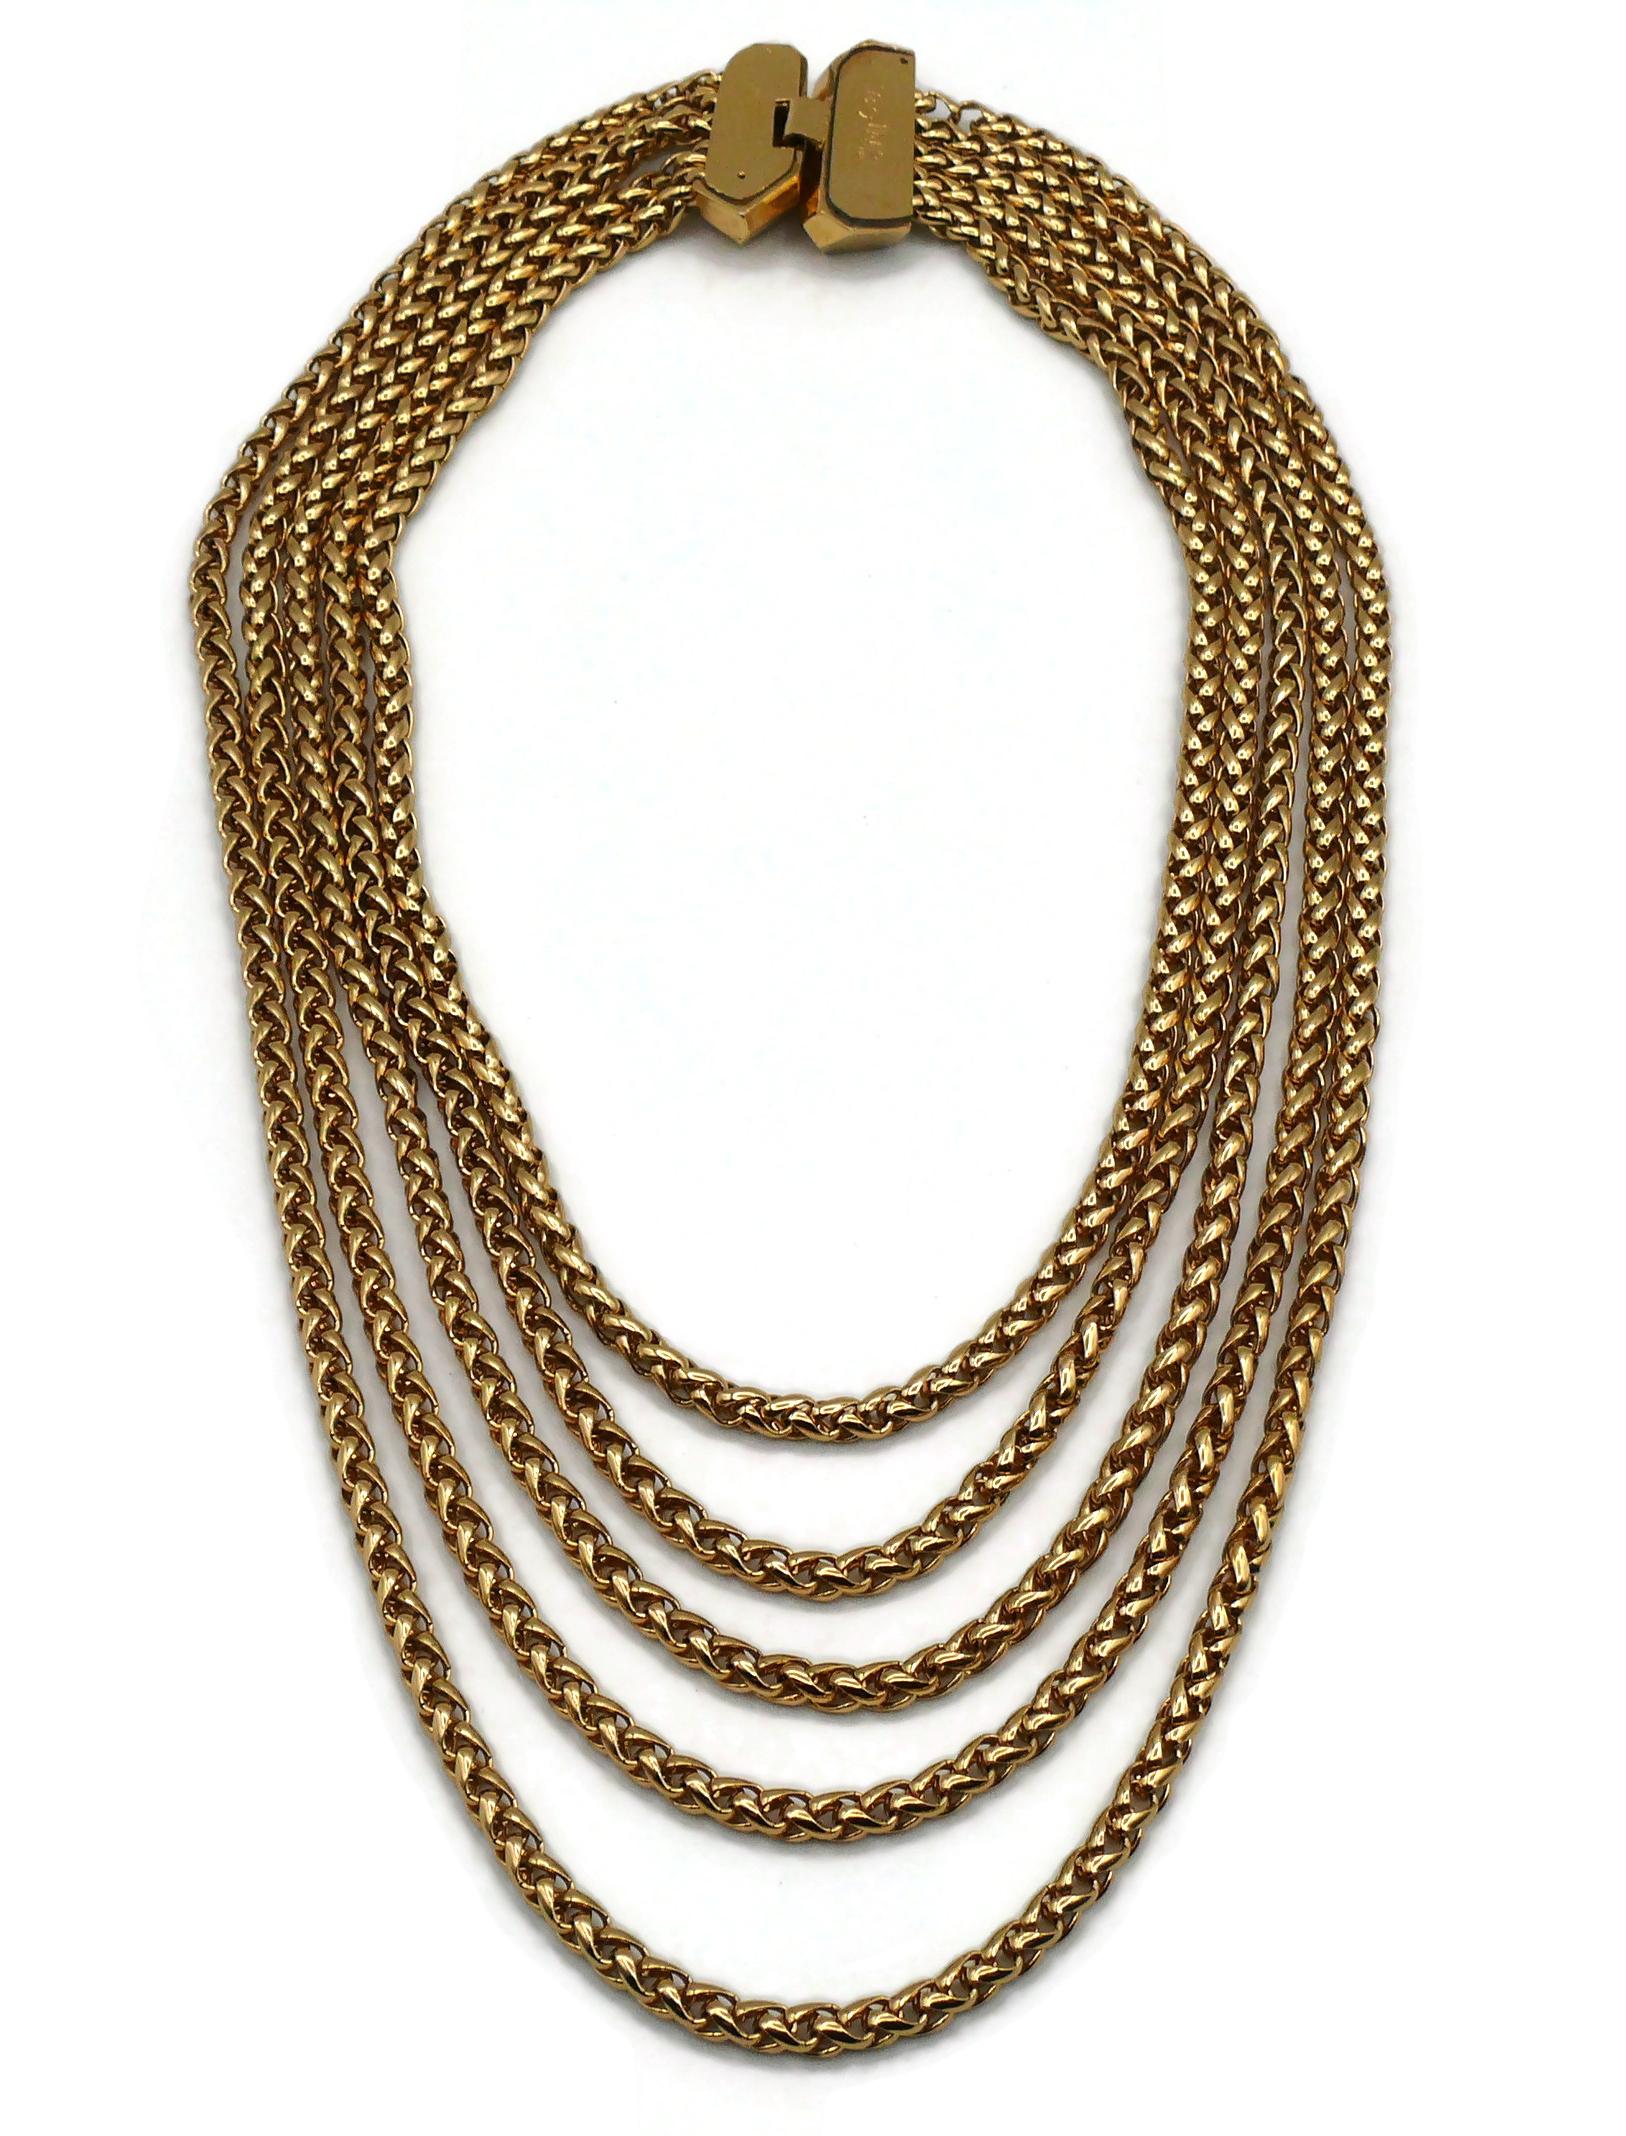 YVES SAINT LAURENT YSL Vintage Gold Tone Multi-Strand Chain Necklace For Sale 4